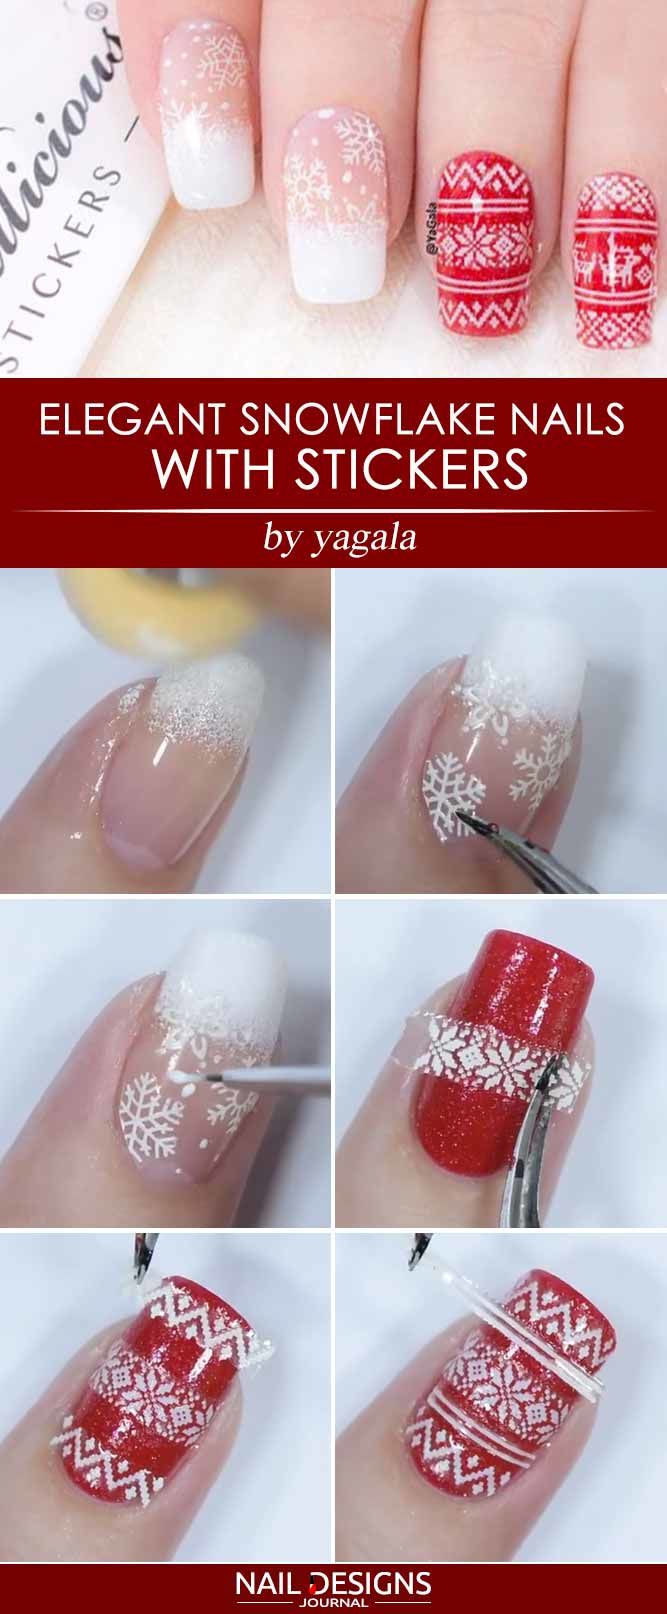 Elegant Snowflake Nails with Stickers